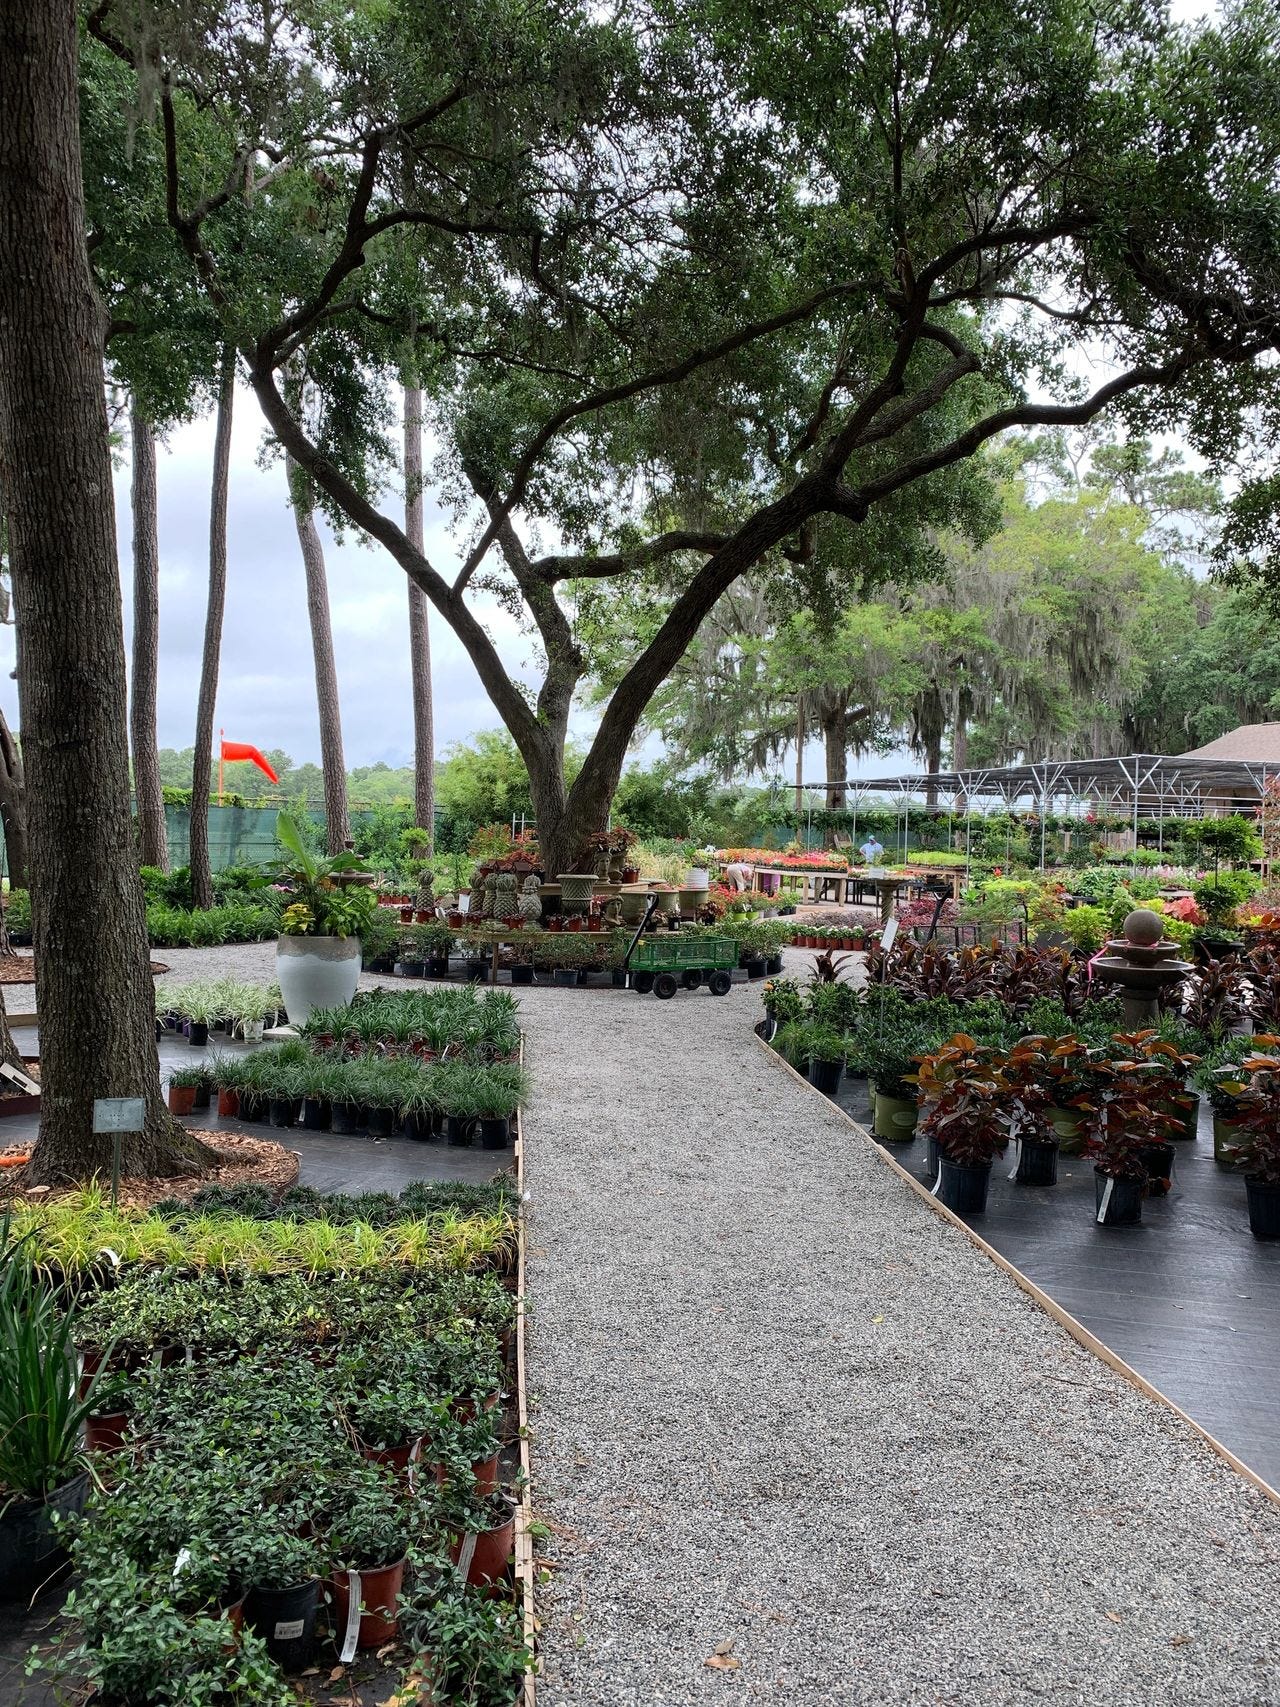 The Green Thumb in Hilton Head Island, SC is not just a beautiful gardening center but also a place to watch/hear planes take off from Hilton Head airport.